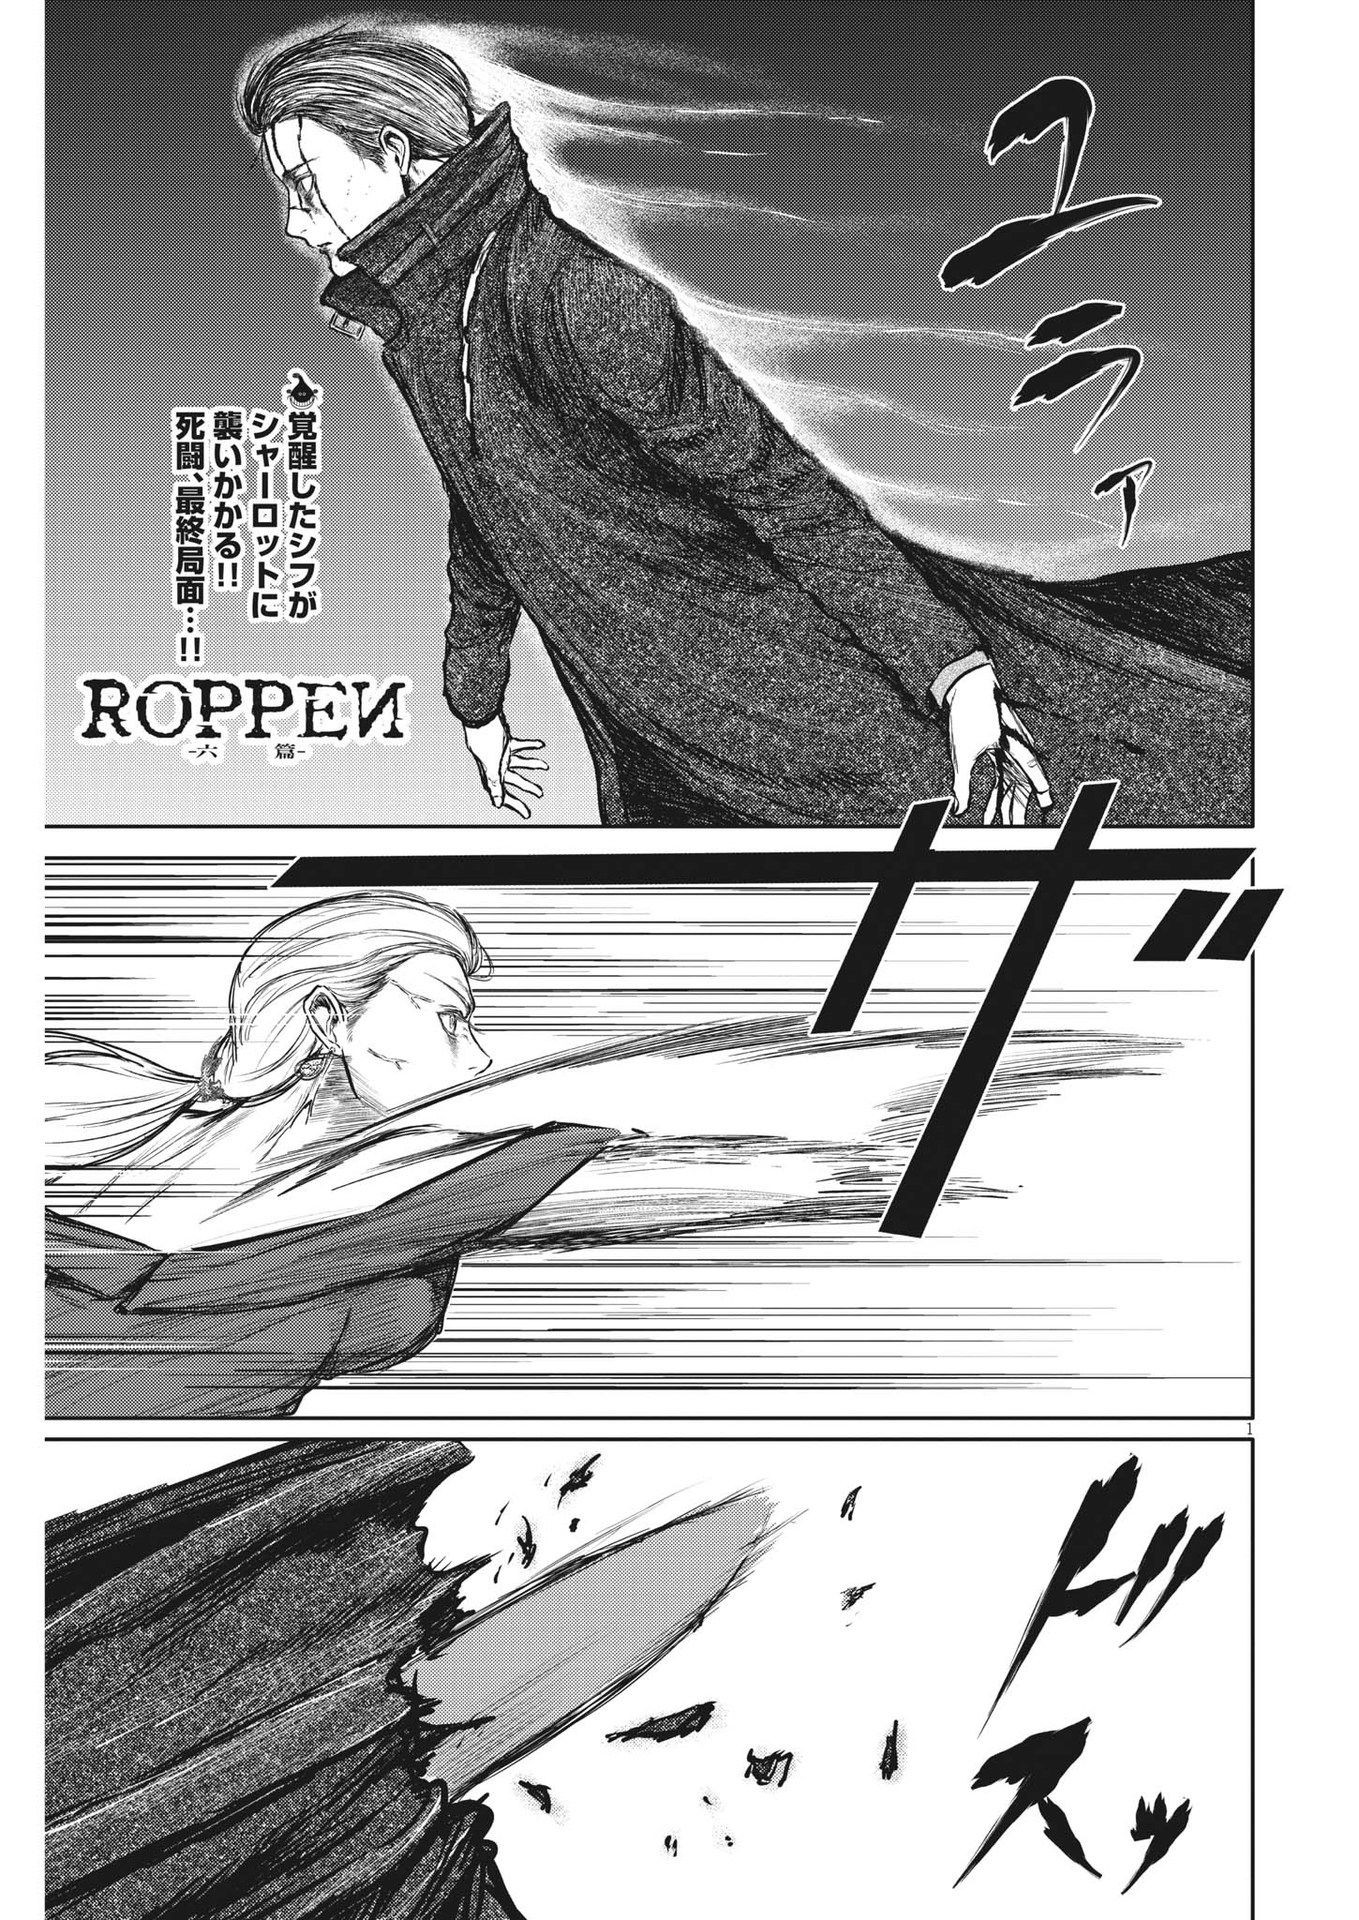 Roppen - Chapter 44 - Page 1